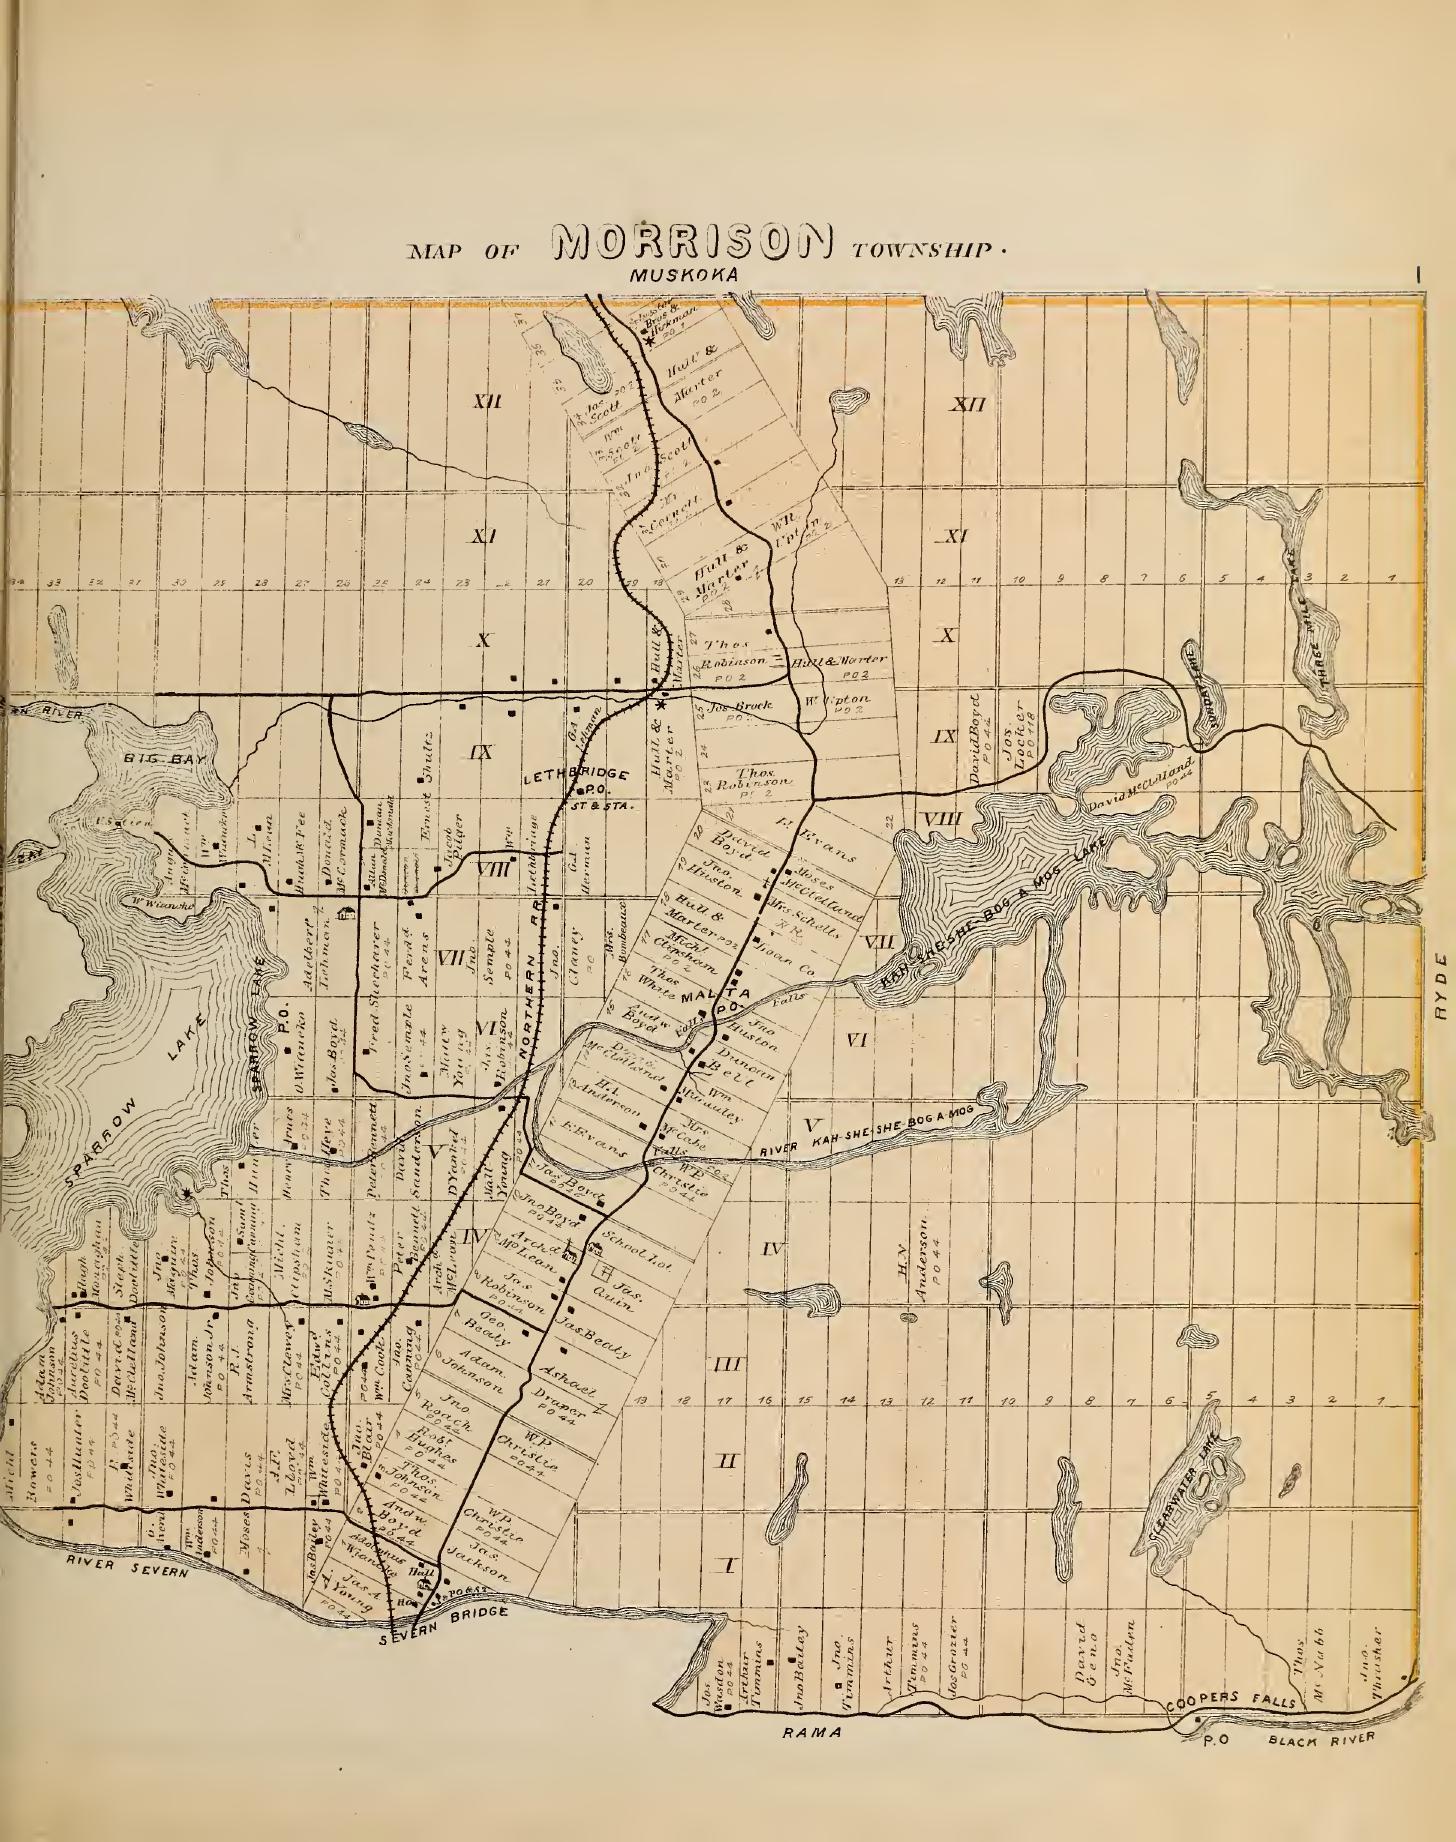 Historical map showing Concessions and Lots for Morrison Township